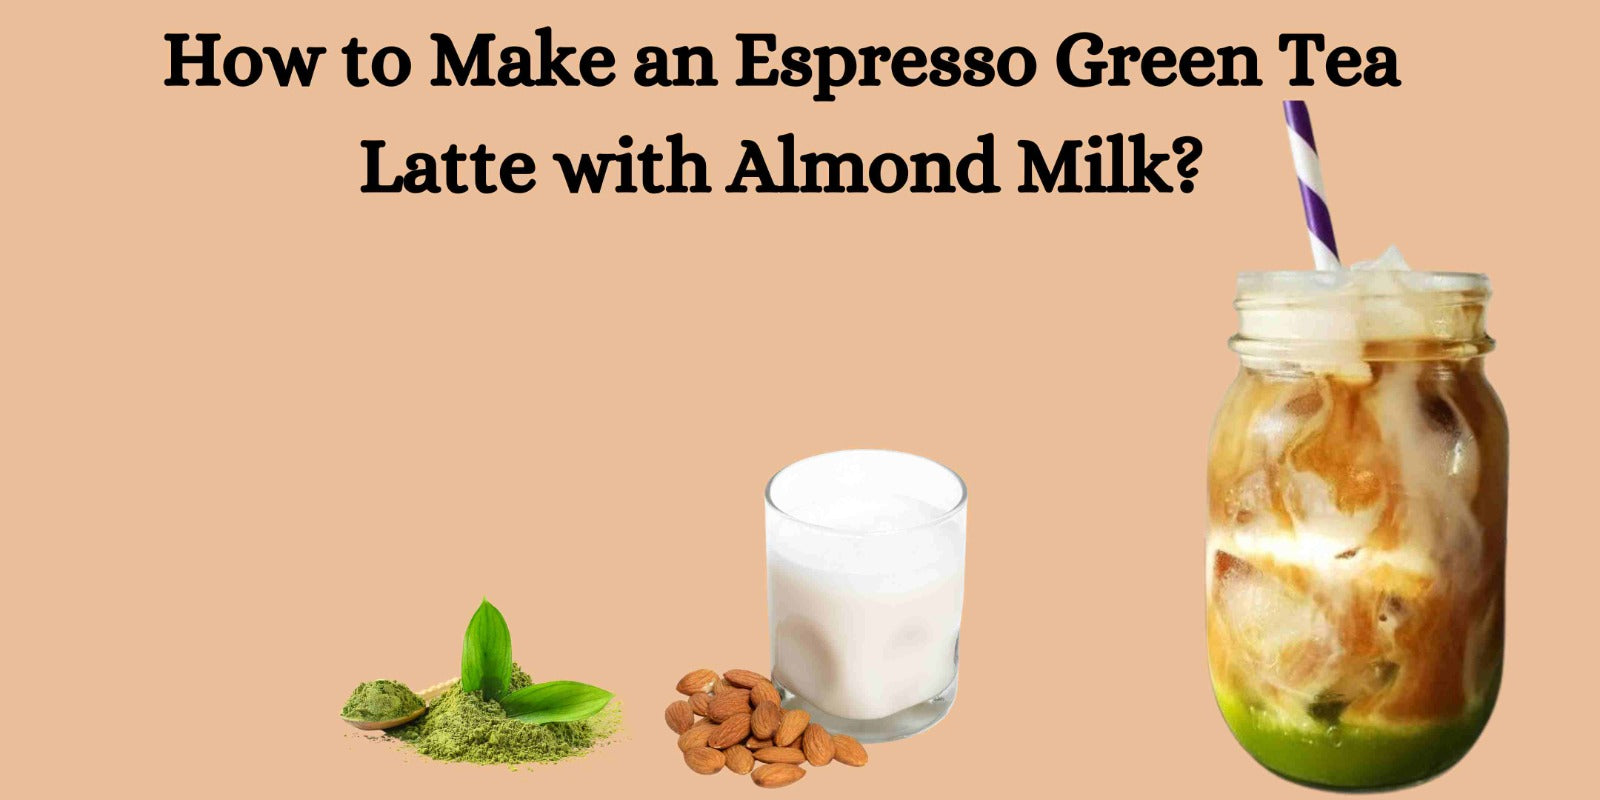 How to Make an Espresso Green Tea Latte with Almond Milk?